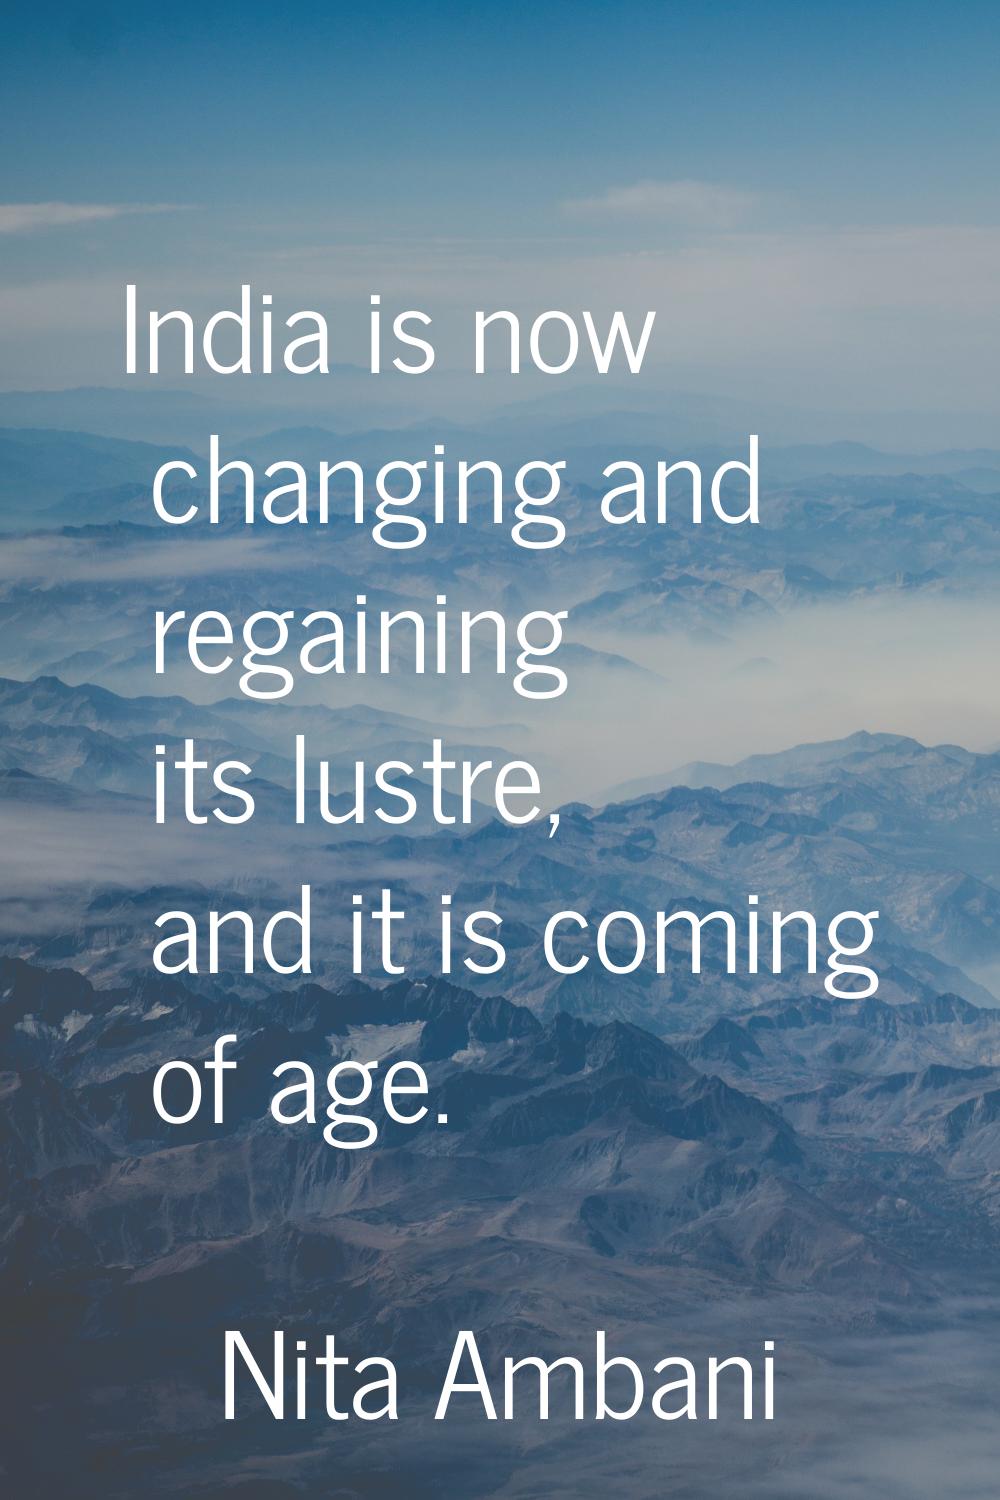 India is now changing and regaining its lustre, and it is coming of age.